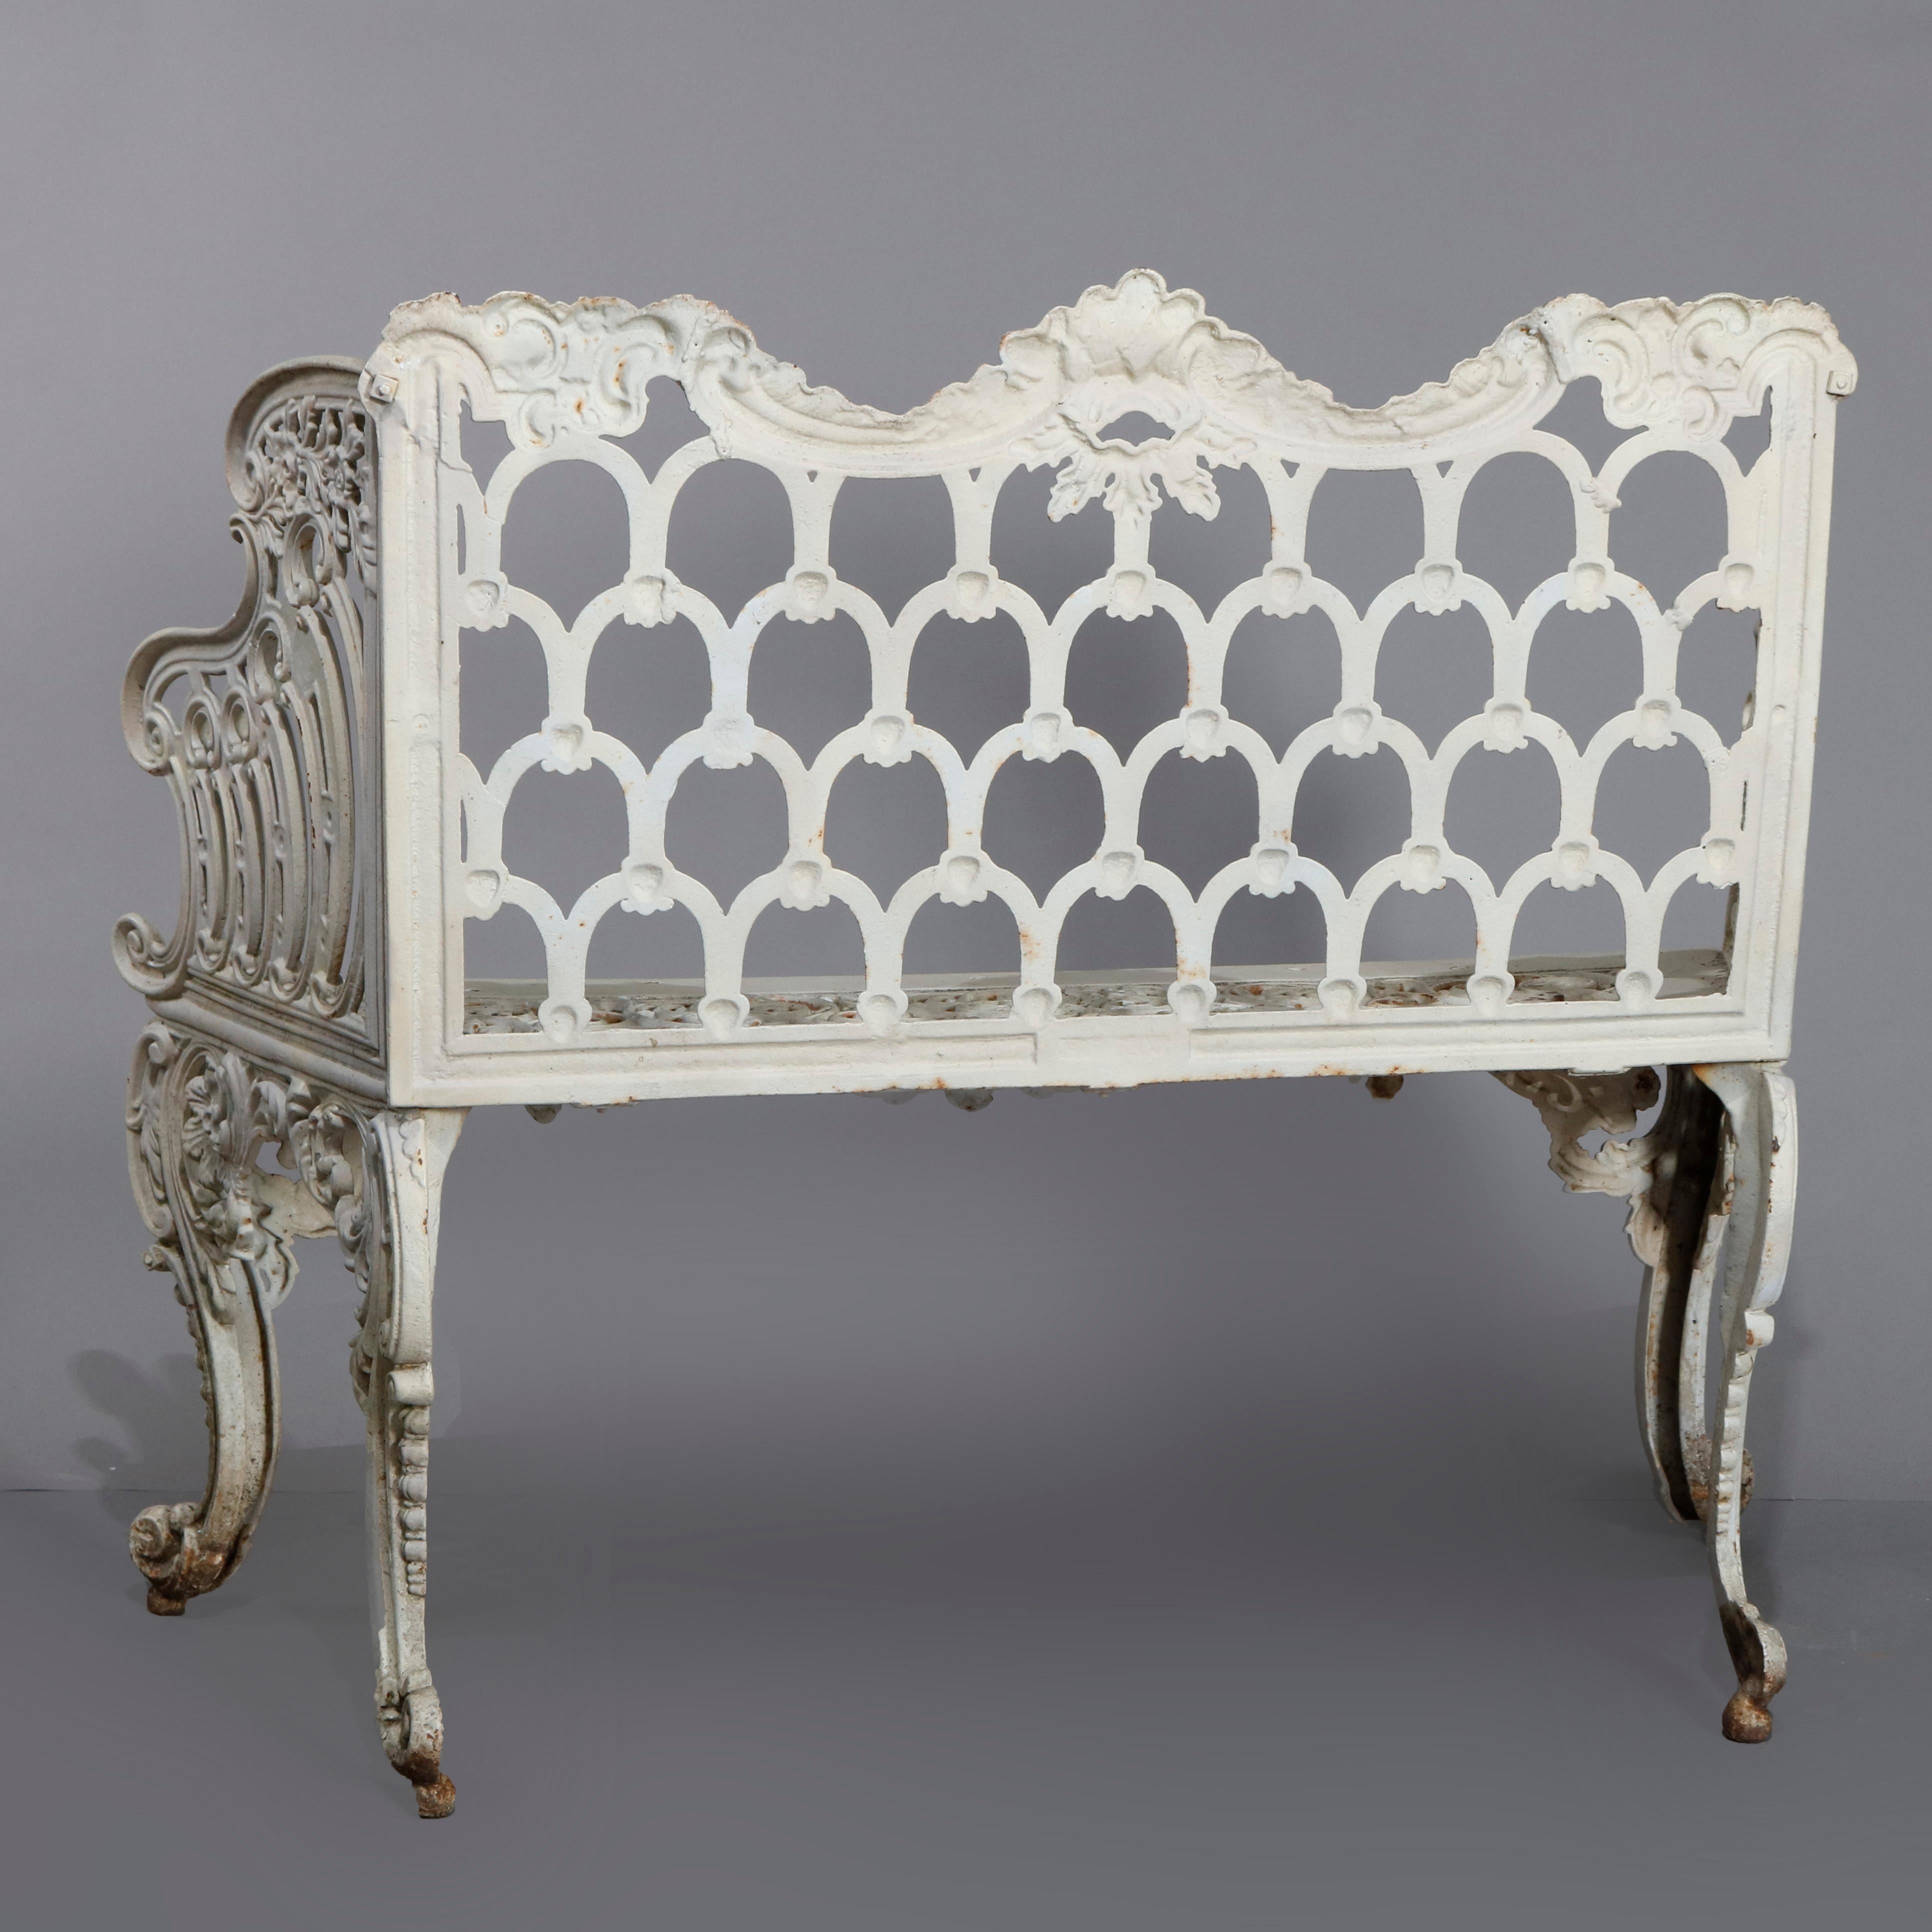 A Rococo Revival white painted and well cast iron 